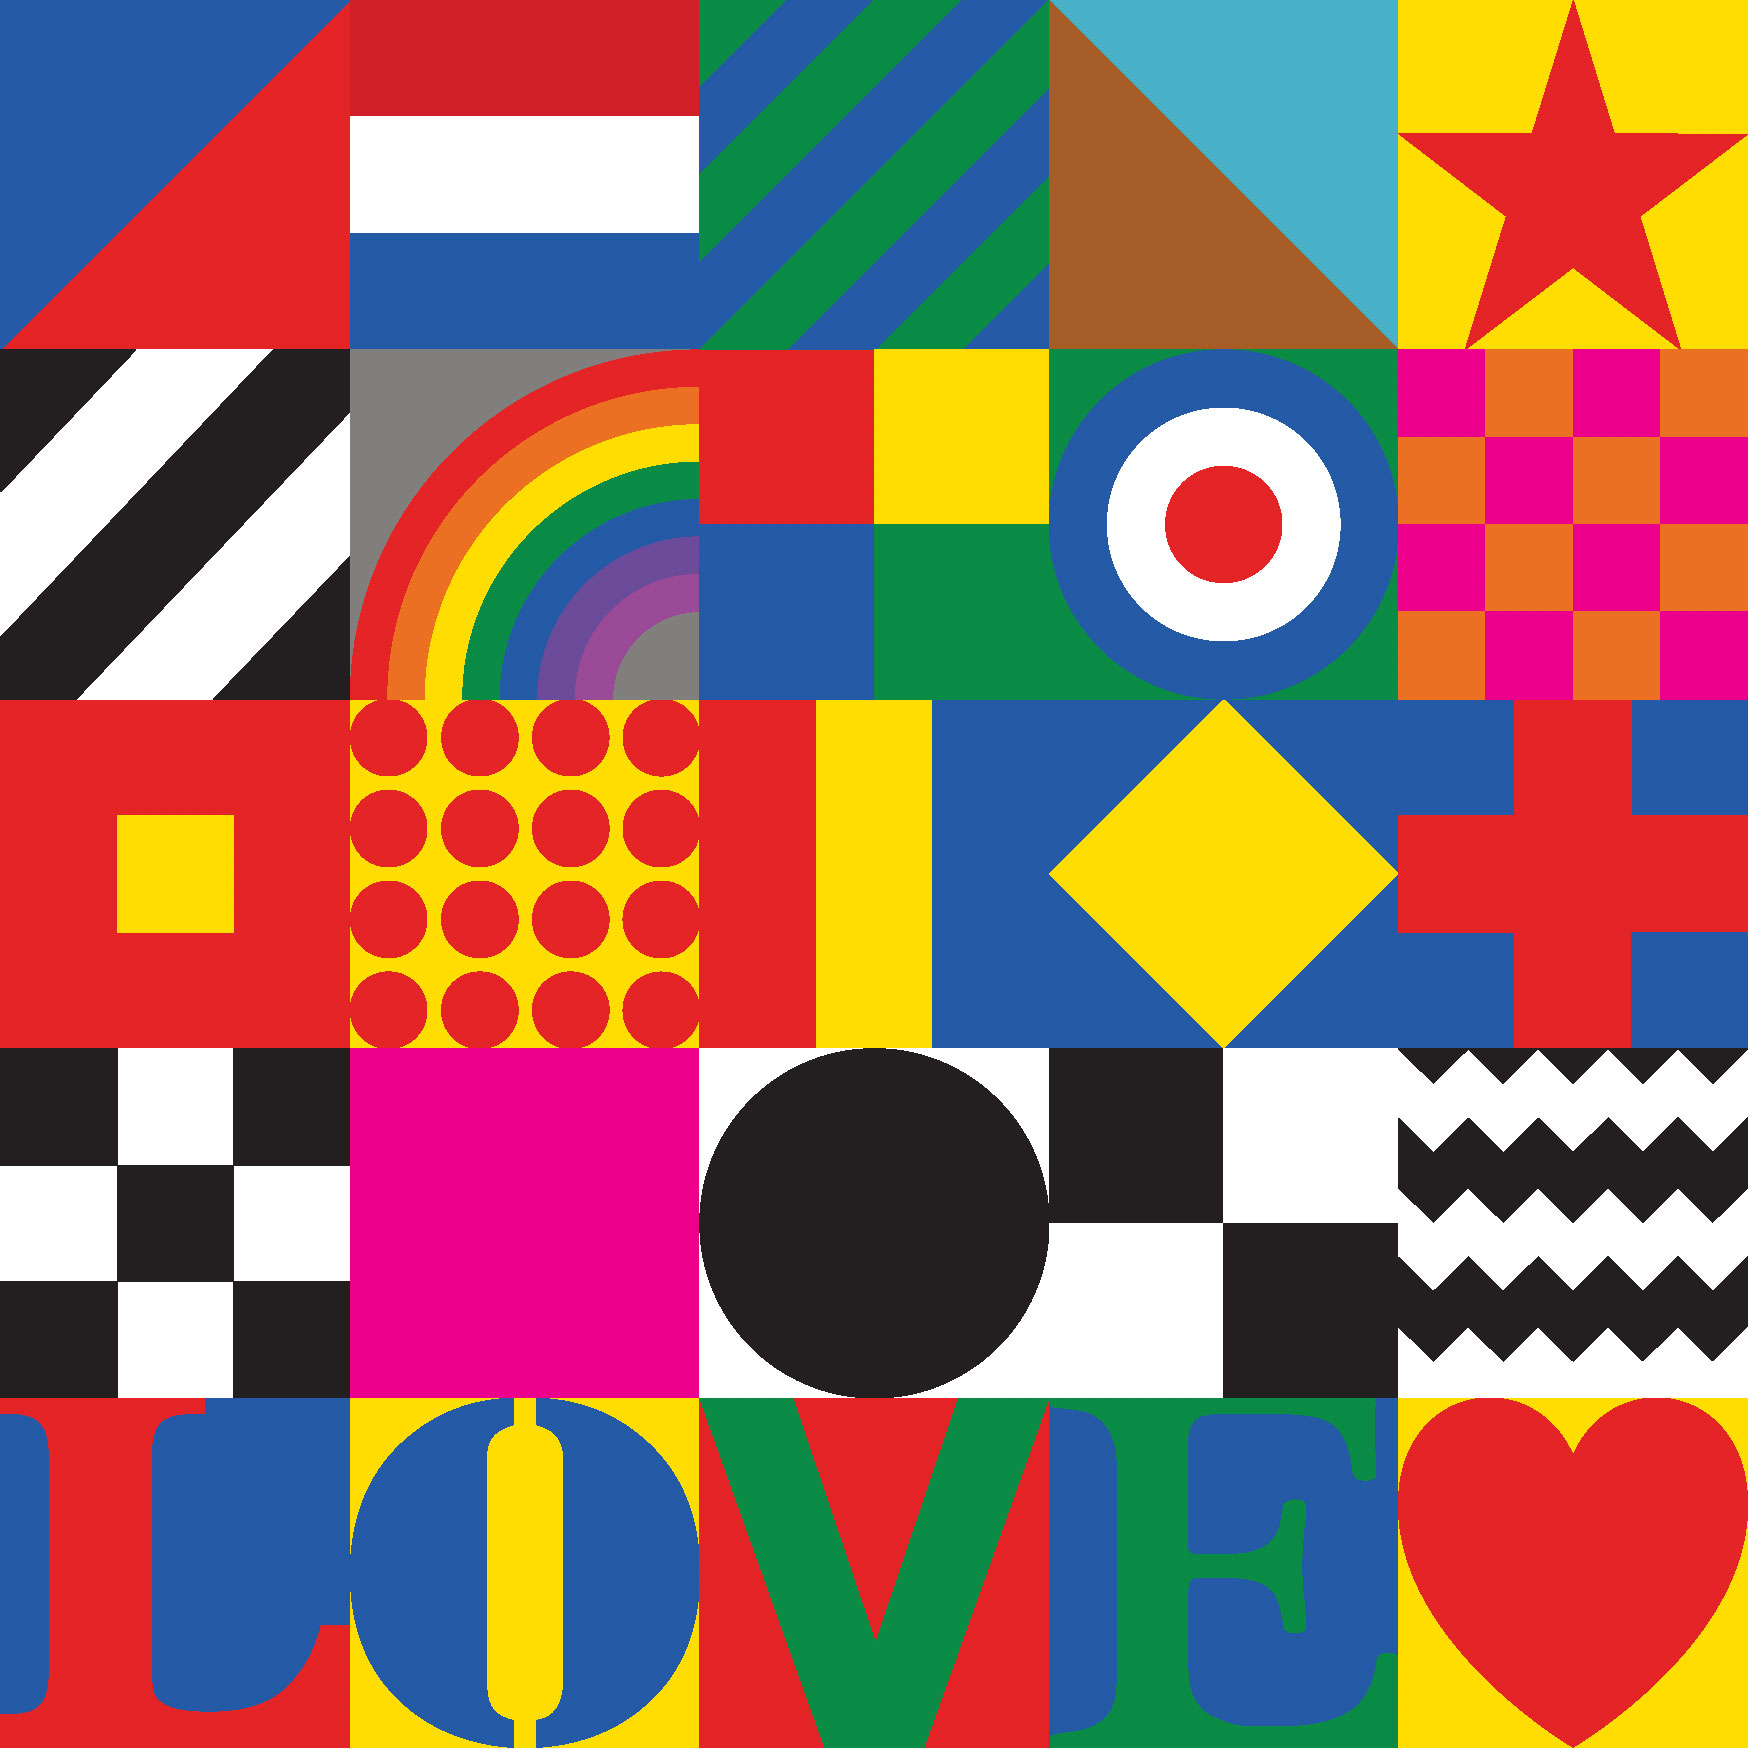 Arty Experiments Silas Amos Collaboration With Sir Peter Blake And David Shillinglaw 00